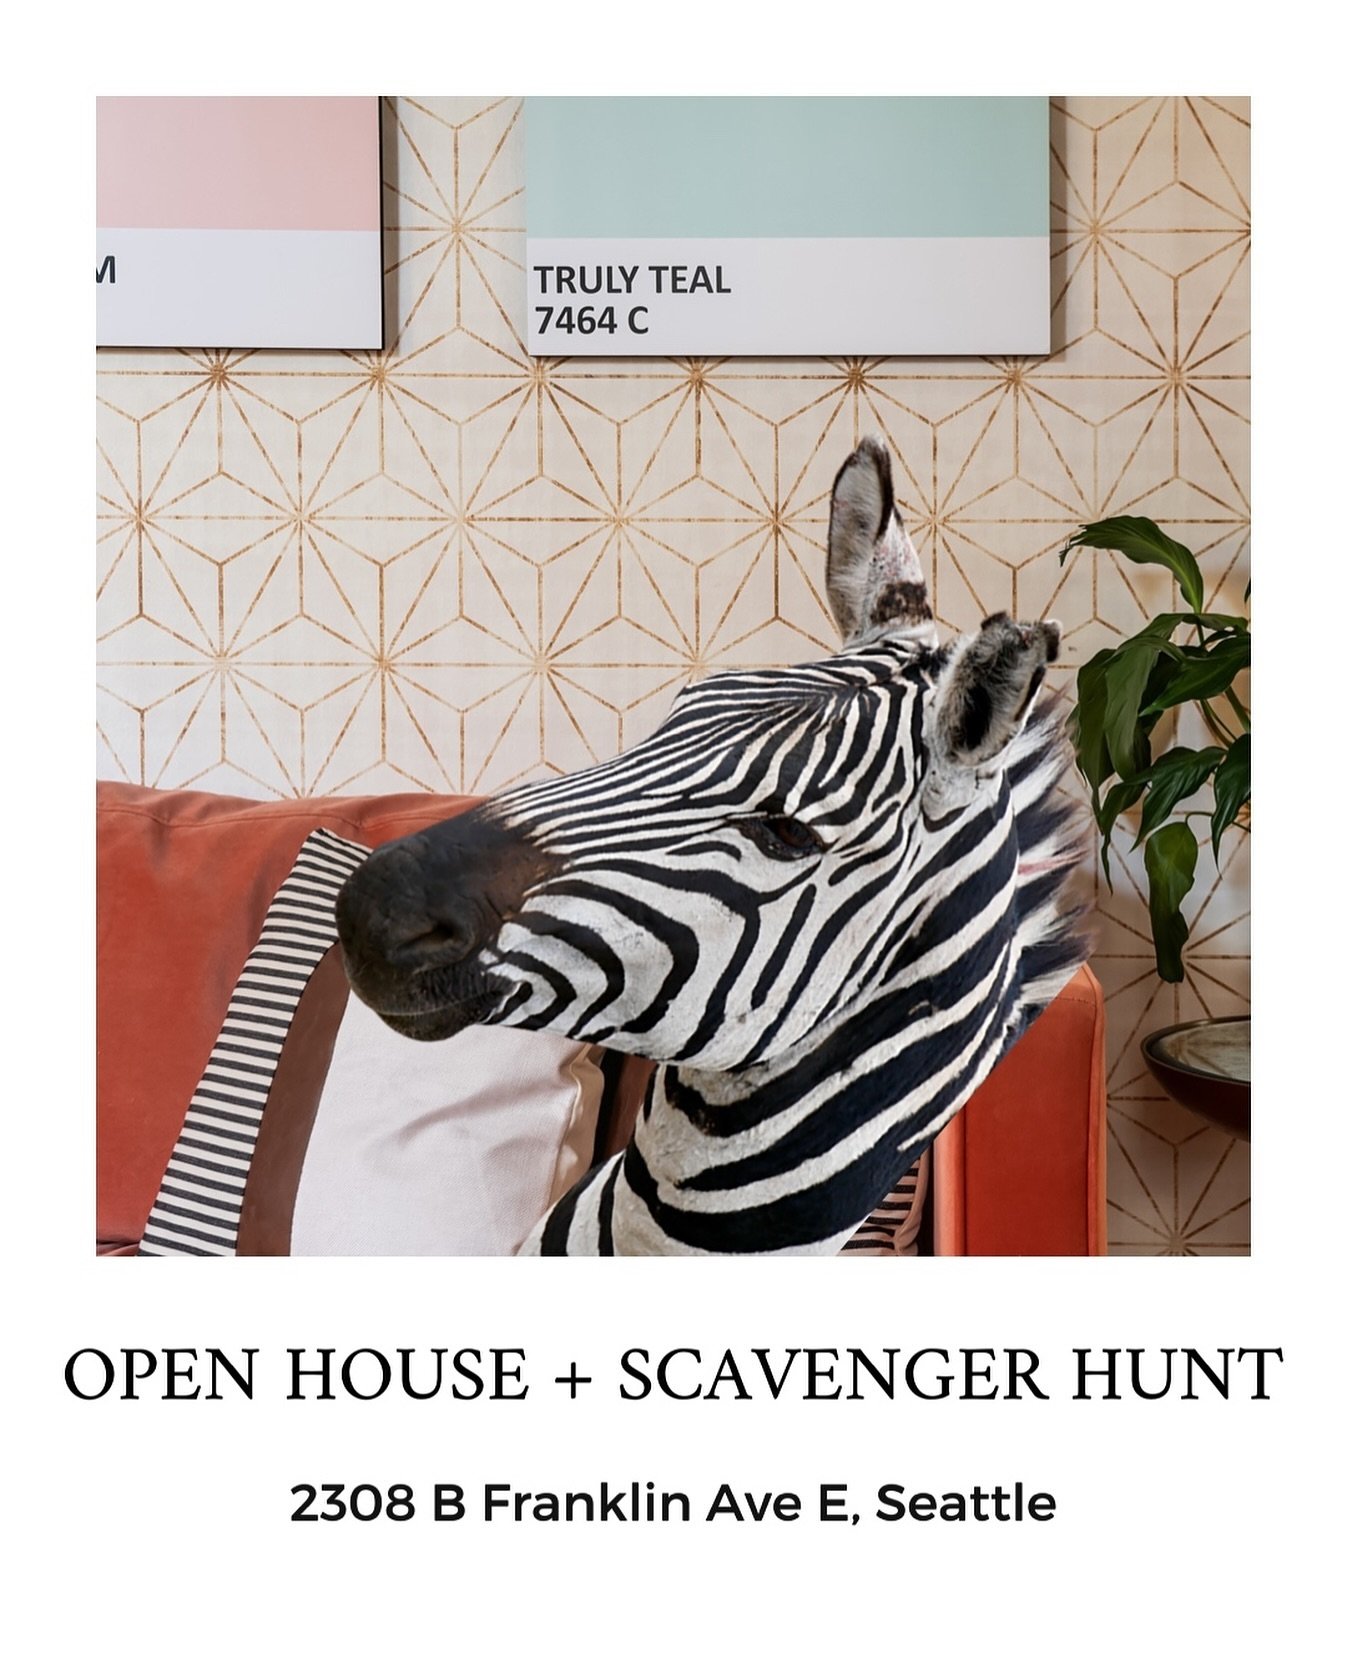 OPEN TODAY, SATURDAY 4TH MAY 1-4PM

North Bend Zebra may have been found, but not before she made herself at home at my Eastlake listing. And who&rsquo;d blame her?

Come and see this in person for yourself and as an added bonus there are some Eastla